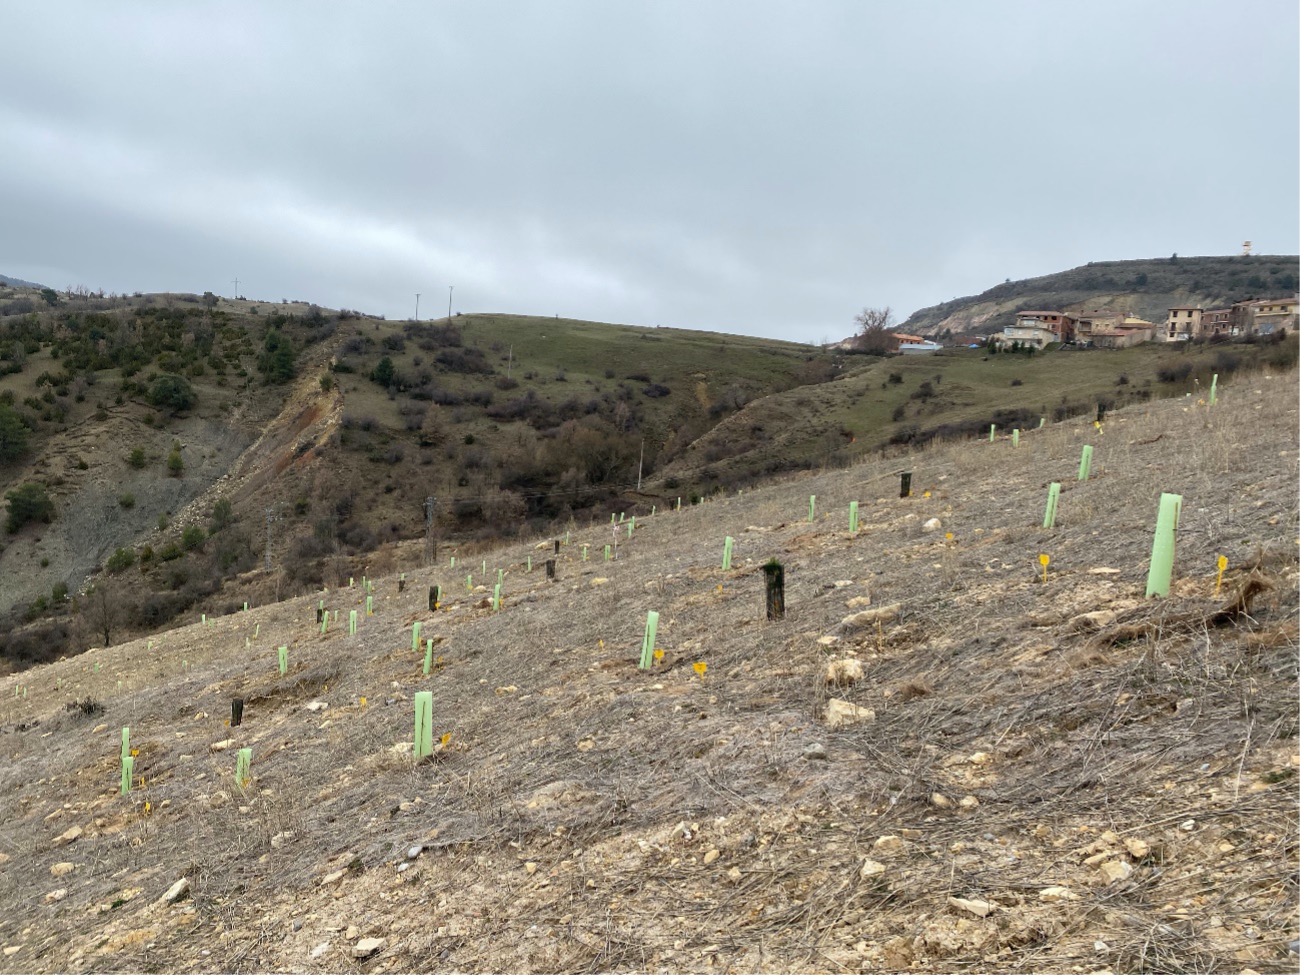 Completed the planting of woody species in the outer heaps of the Santa Engracia mine  – January 27th 2022